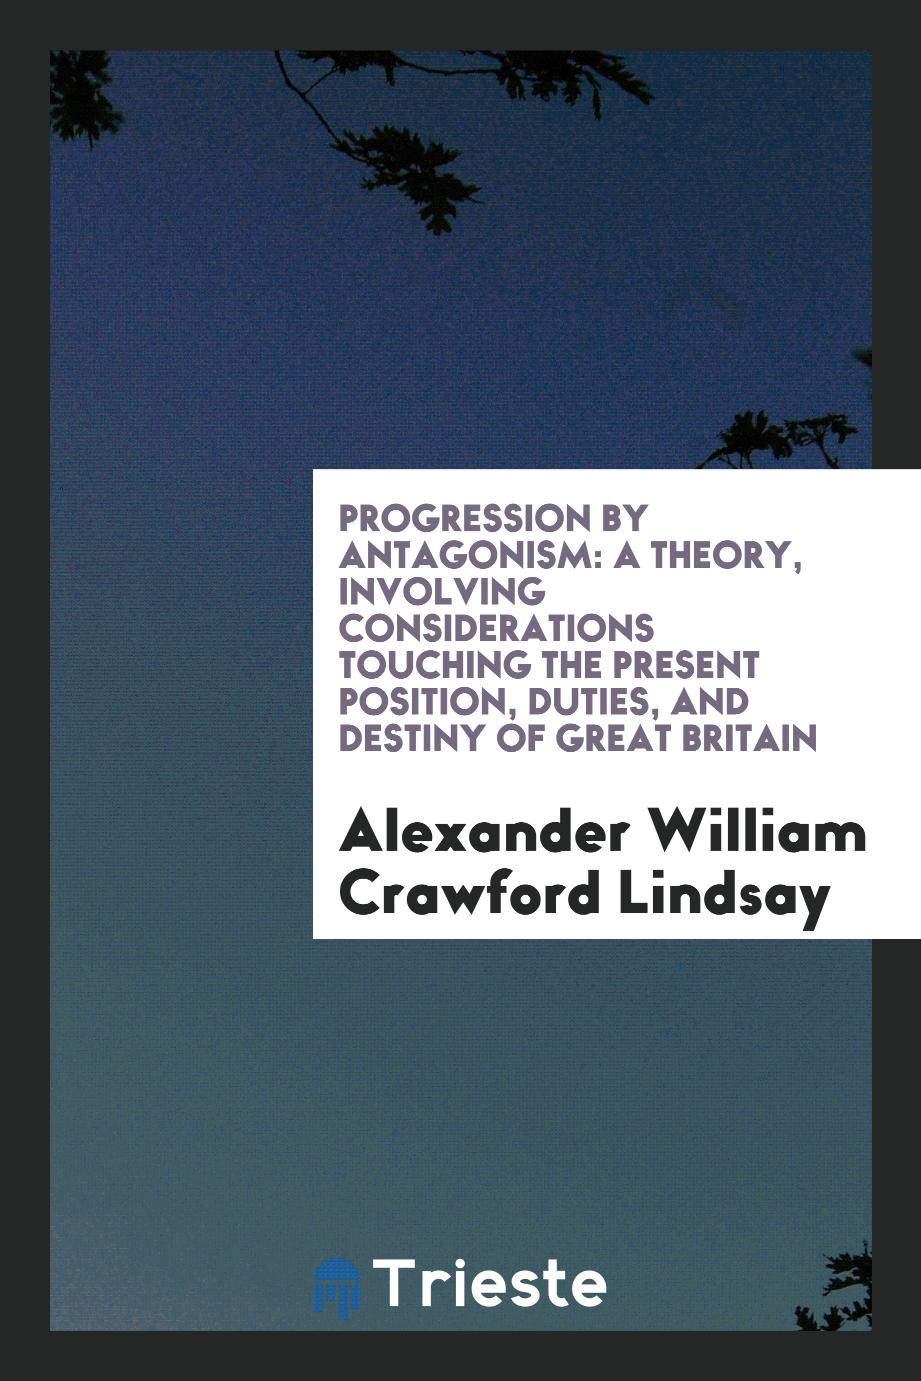 Progression by Antagonism: A Theory, Involving Considerations Touching the Present Position, Duties, and Destiny of Great Britain